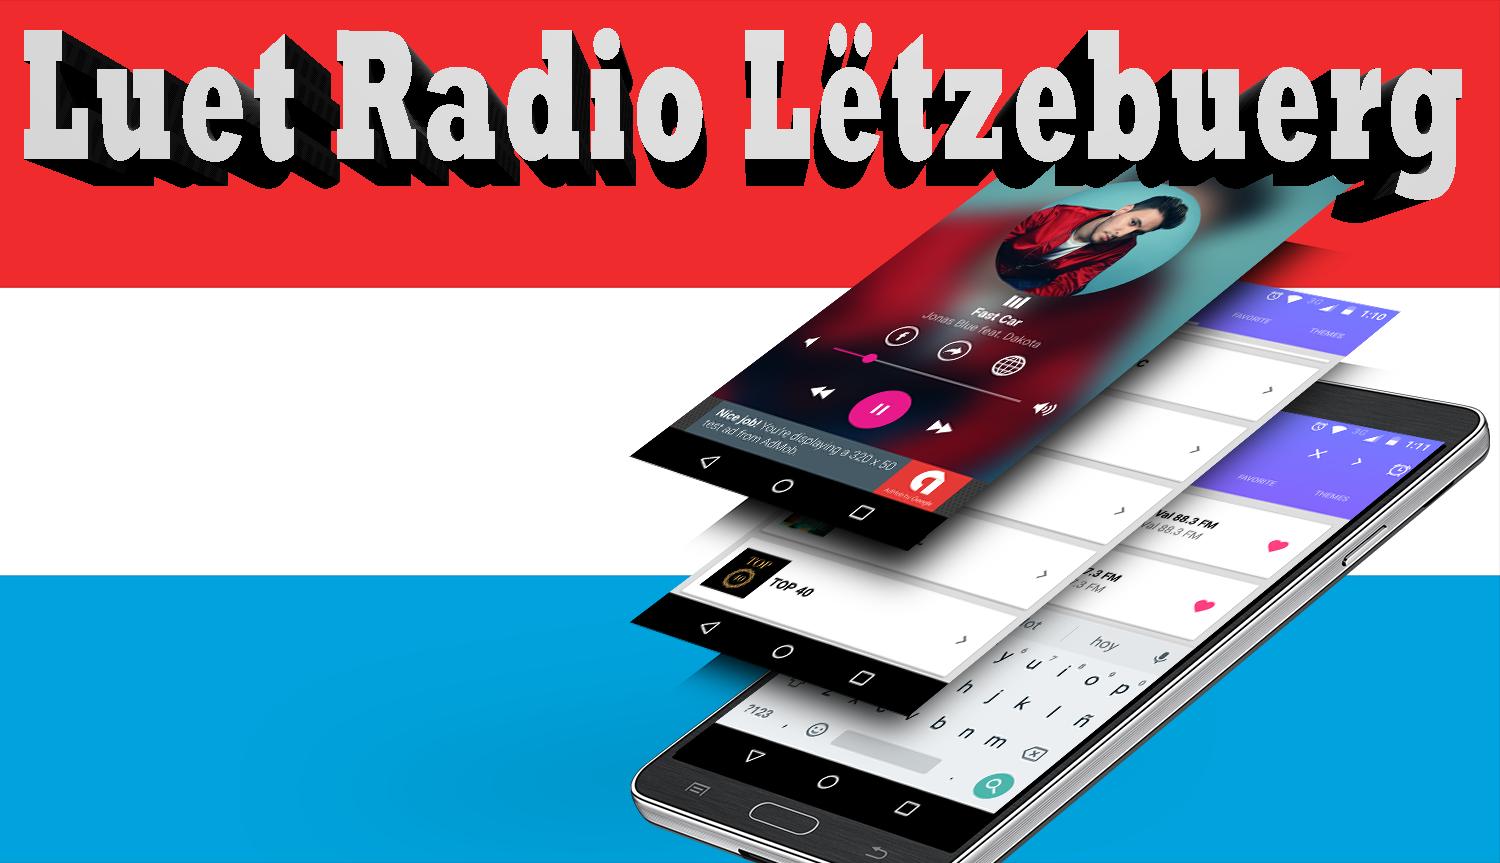 Radio Latina 101.2 FM Online for Android - APK Download